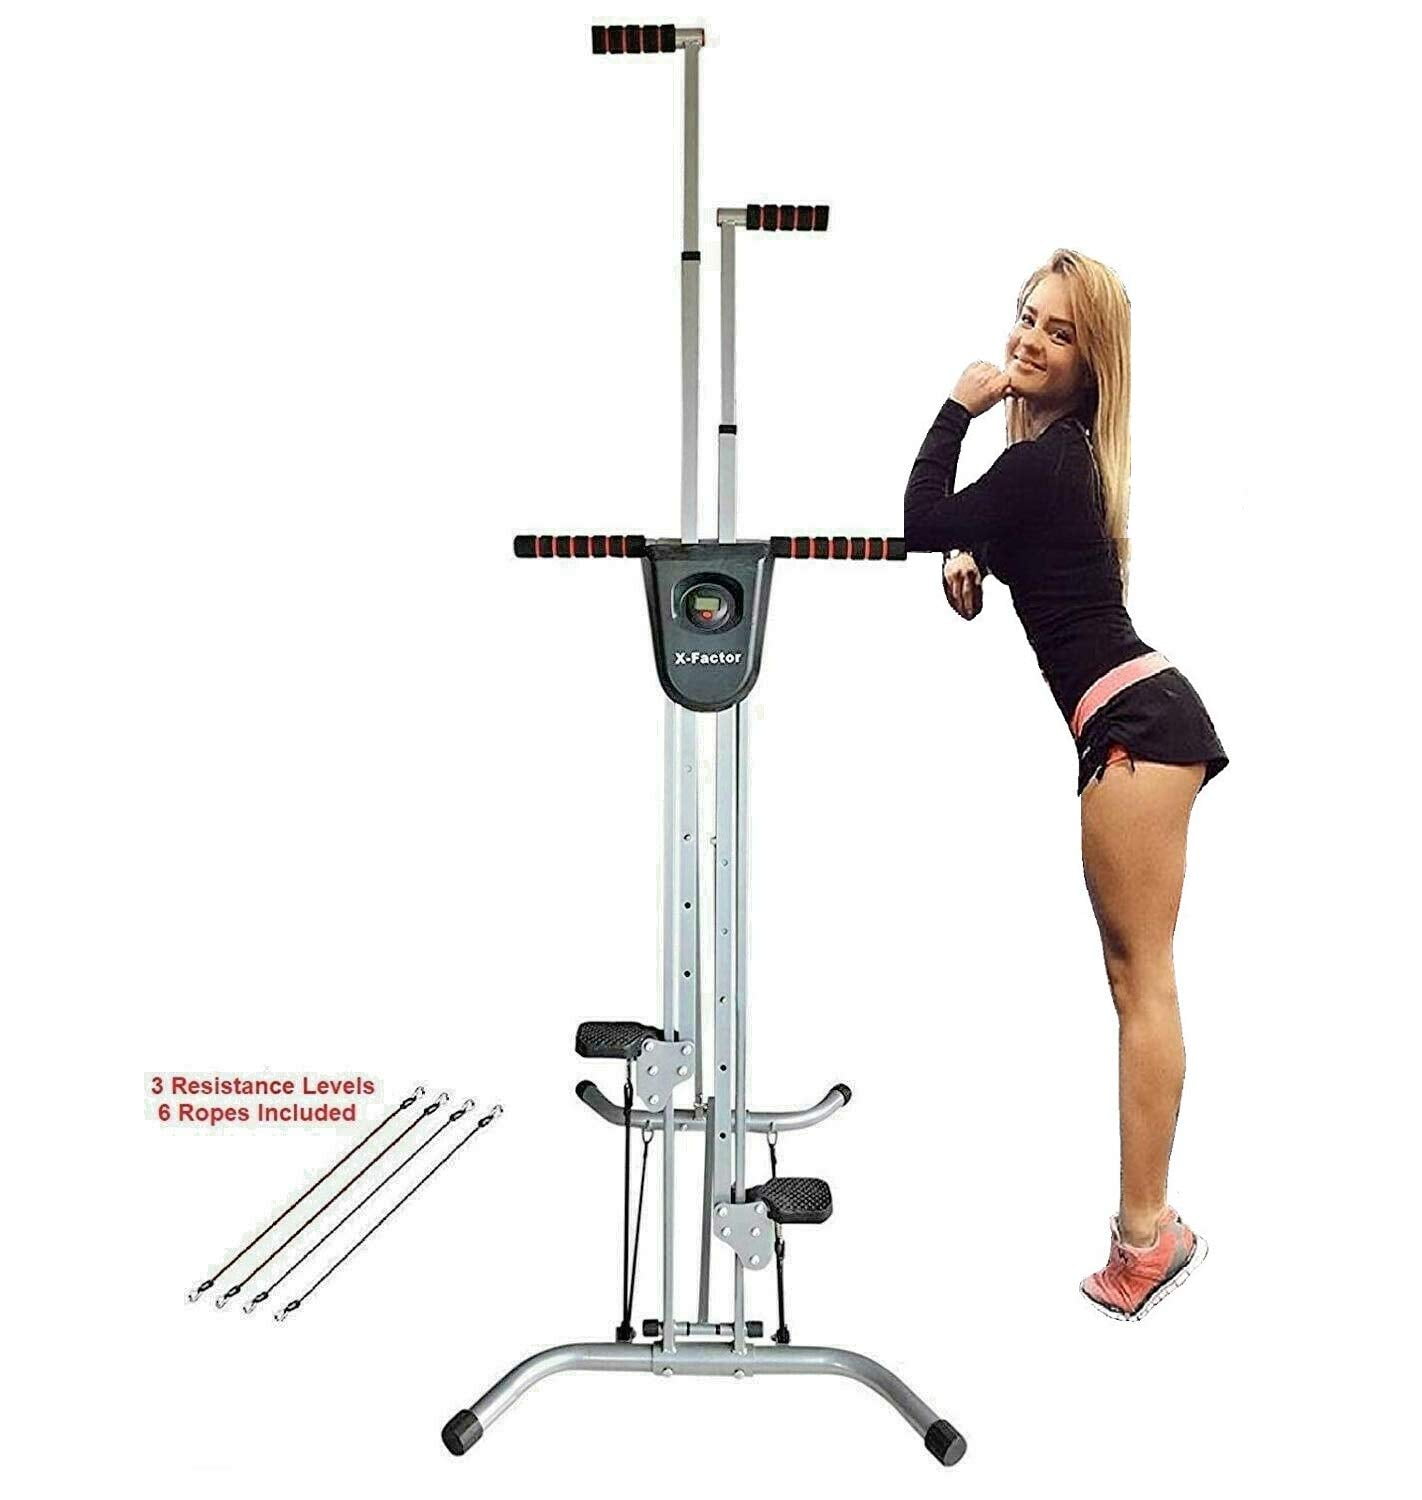 X Factor Vertical Climber Maxi Workout XR with Resistance Bands 